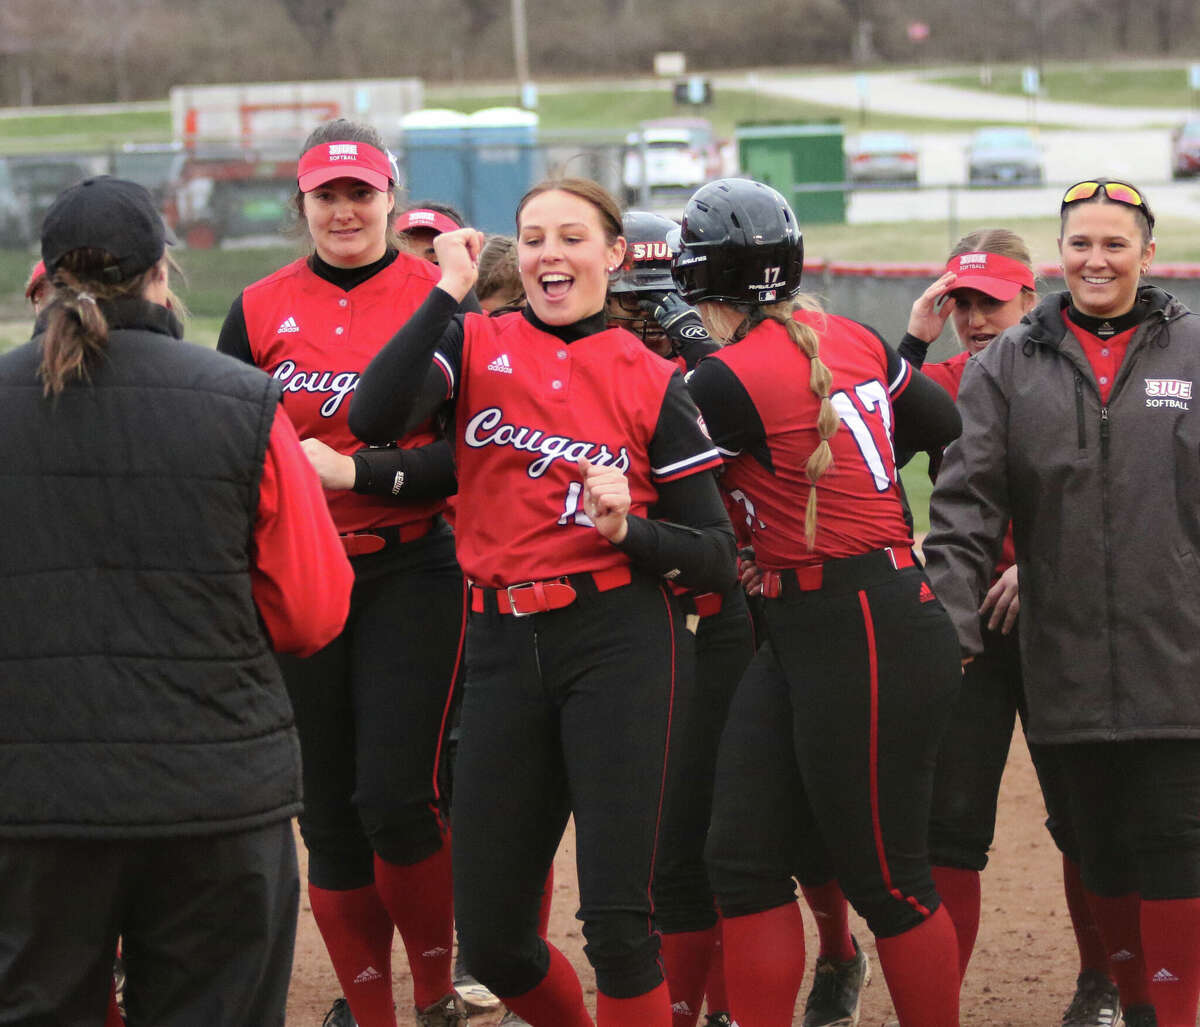 SIUE winning pitcher Sydney Baalman (middle) busts out a little dance move while the Cougars celebrate a walk-off win over Saint Louis on Wednesday afternoon at Cougar Field in Edwardsville.